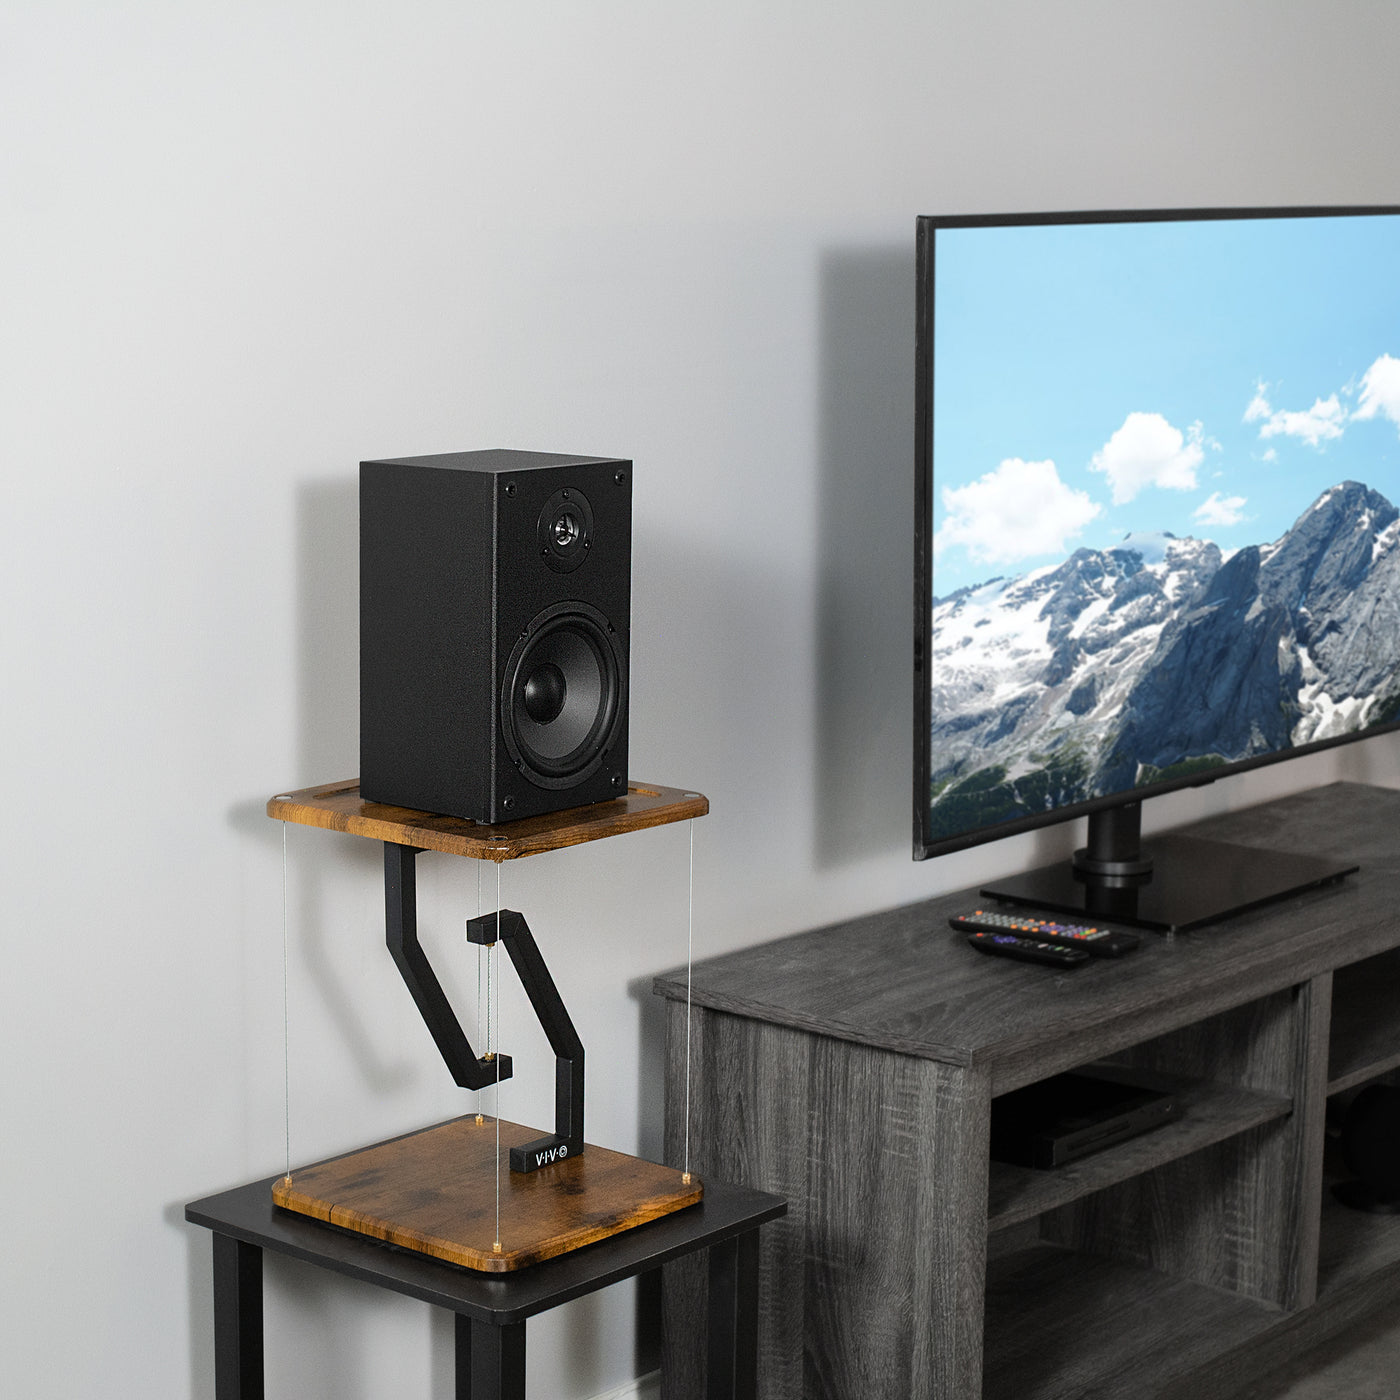 Modern TV space with surround sound speakers on anti-gravity floating stands.